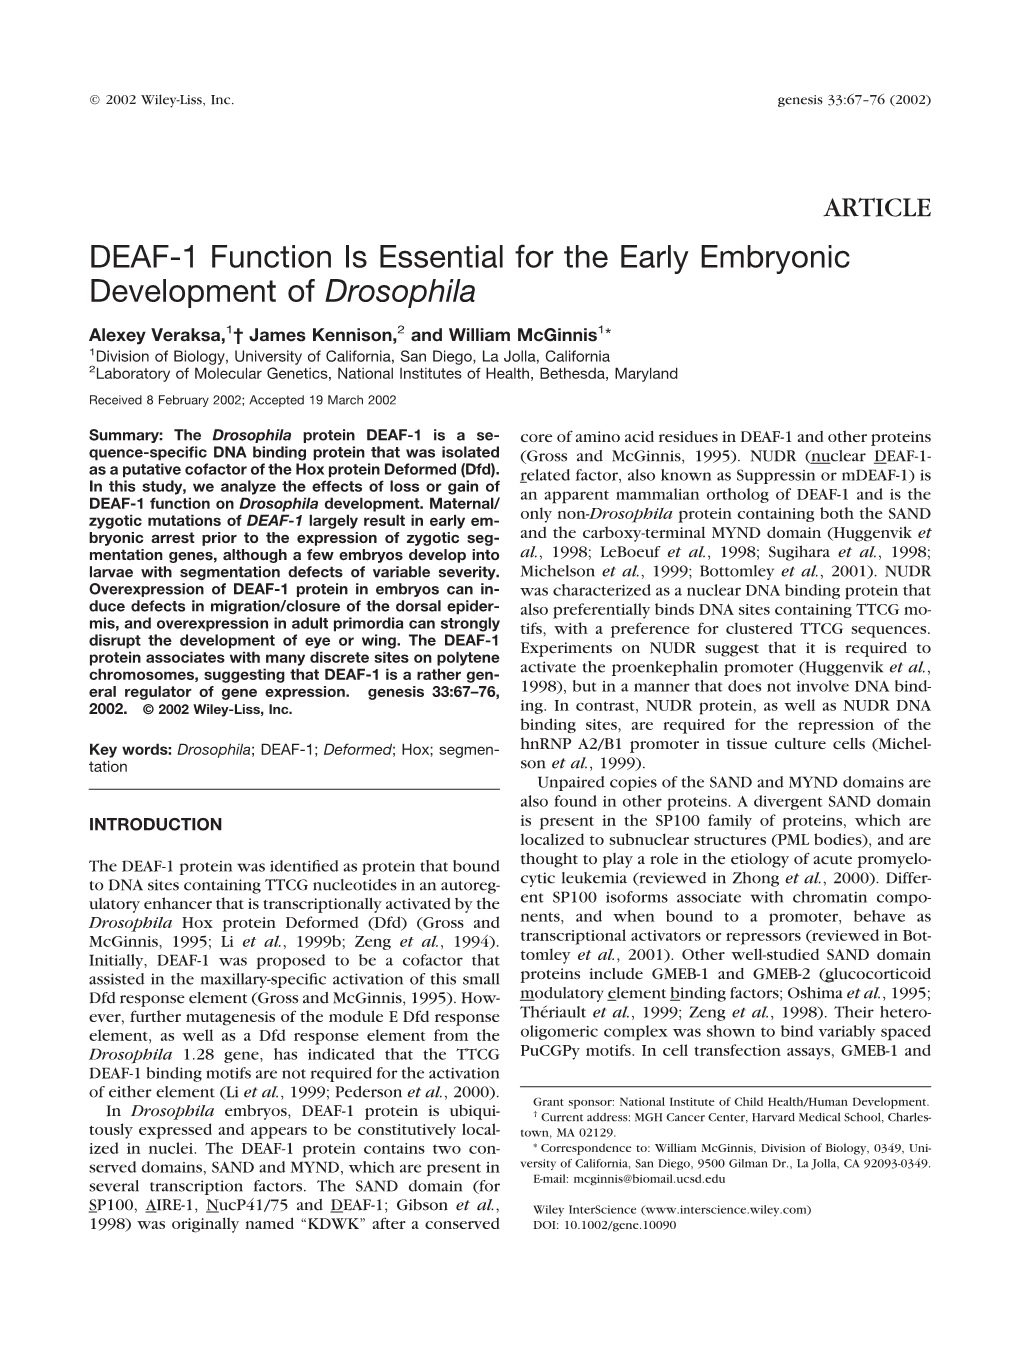 DEAF-1 Function Is Essential for the Early Embryonic Development Of